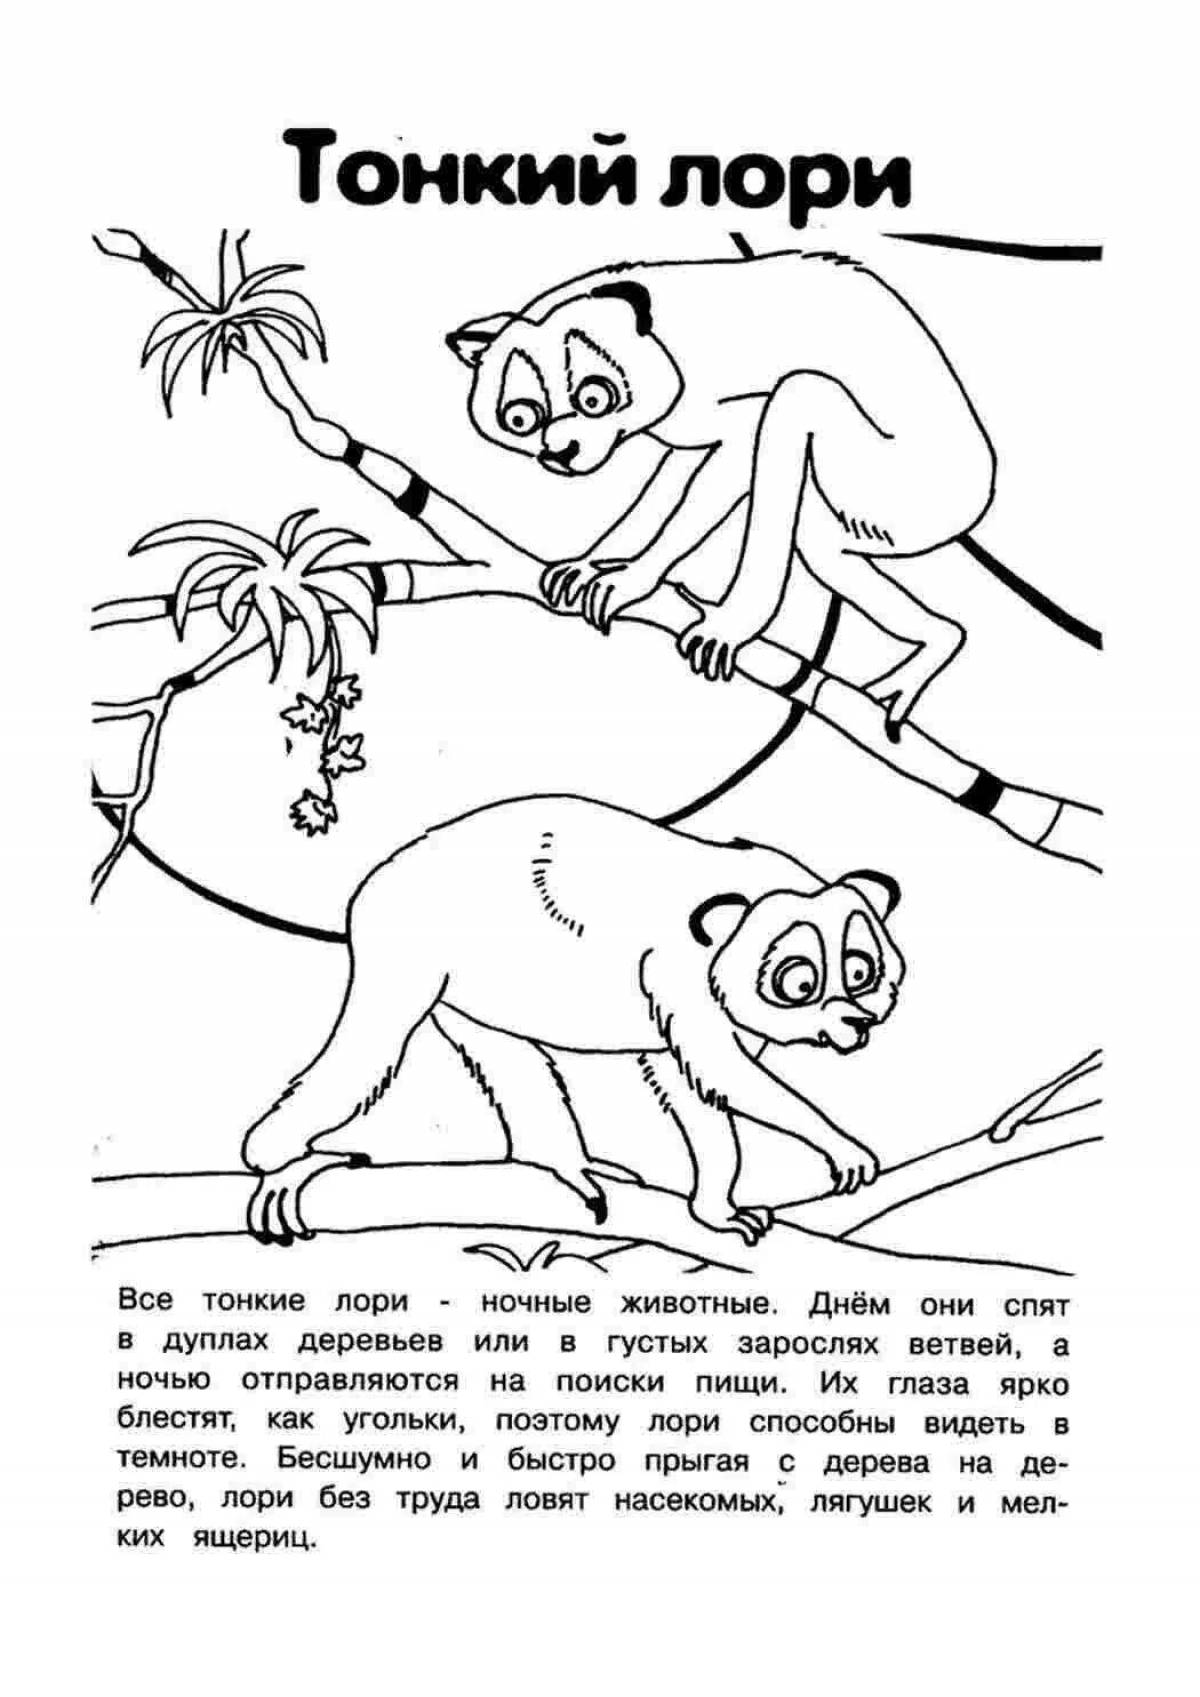 Fabulous coloring pages animals from the red book